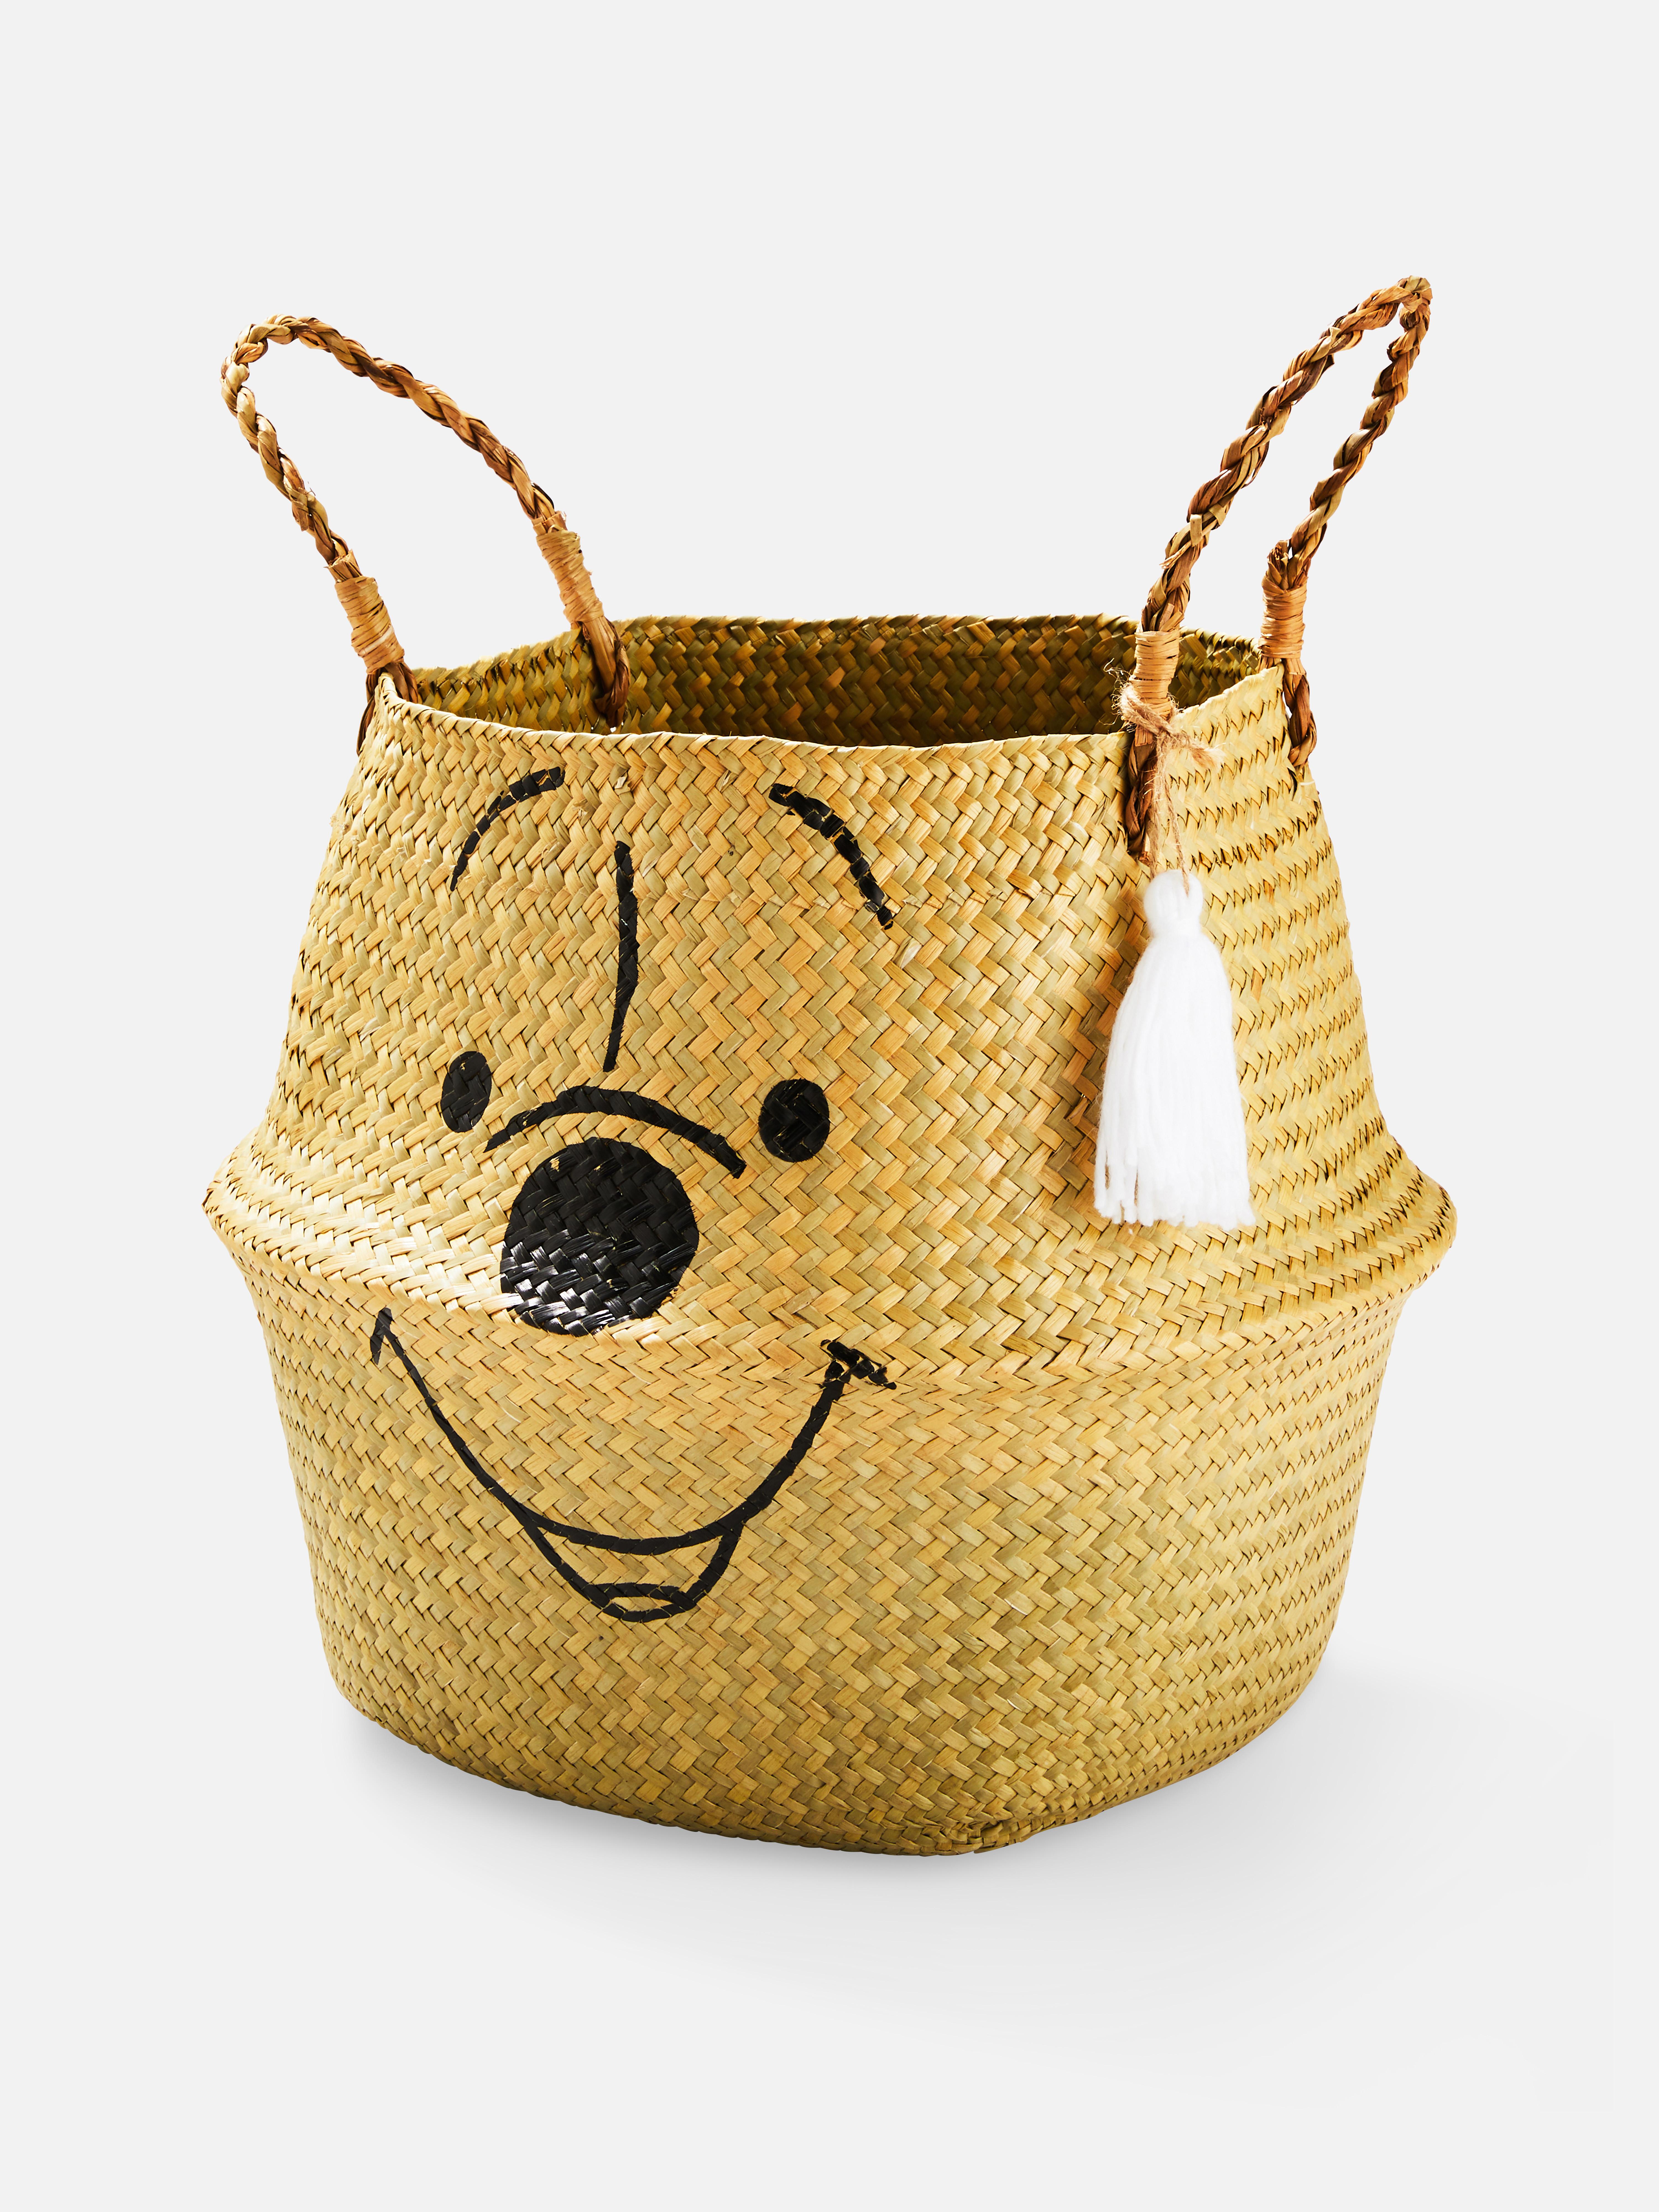 Disney's Winnie The Pooh Collapsible Basket